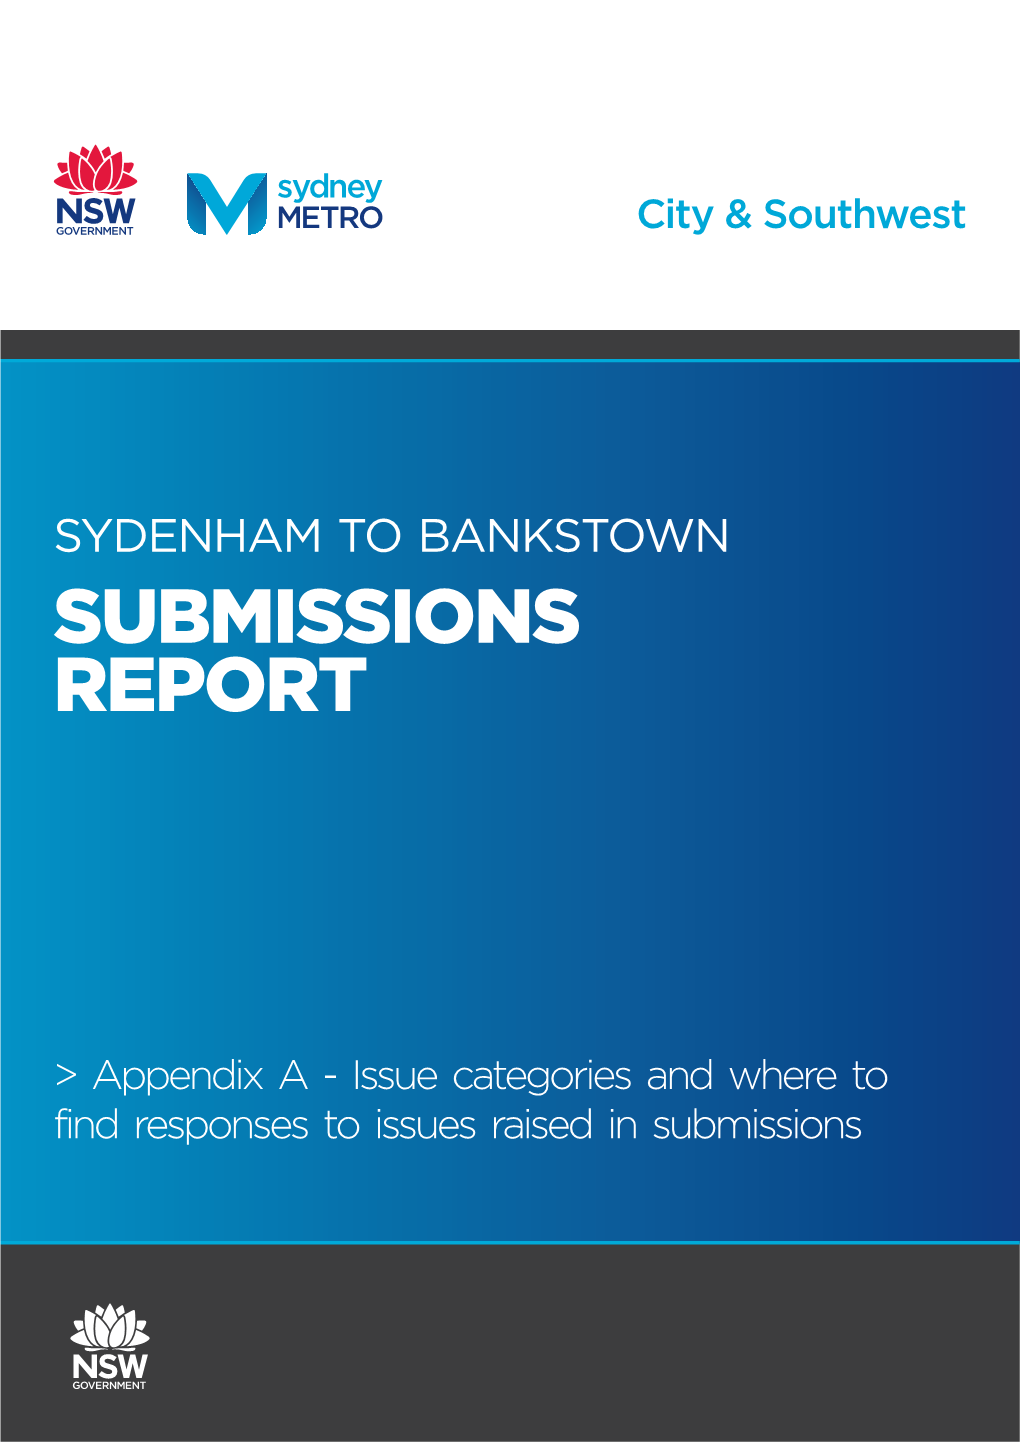 Sydenham to Bankstown Submissions Report